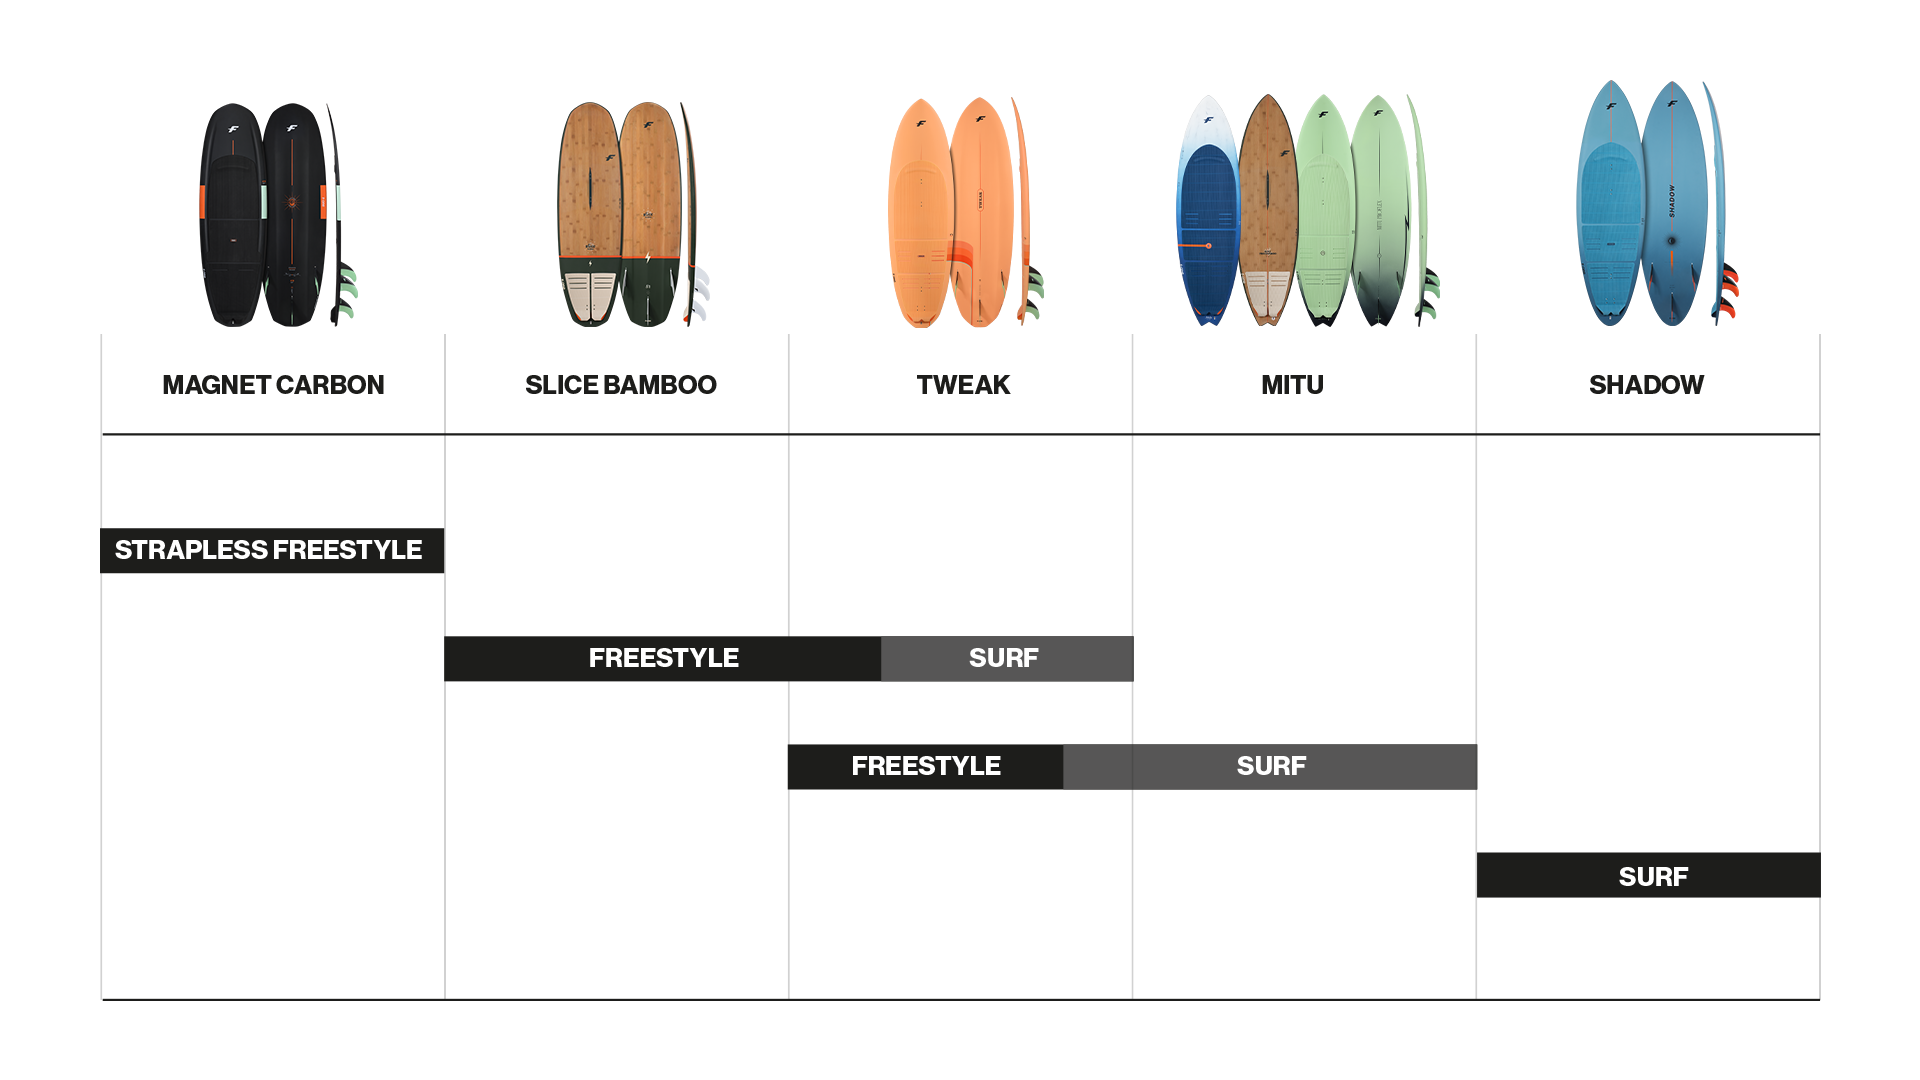 2023 Collection - Surfboards 8